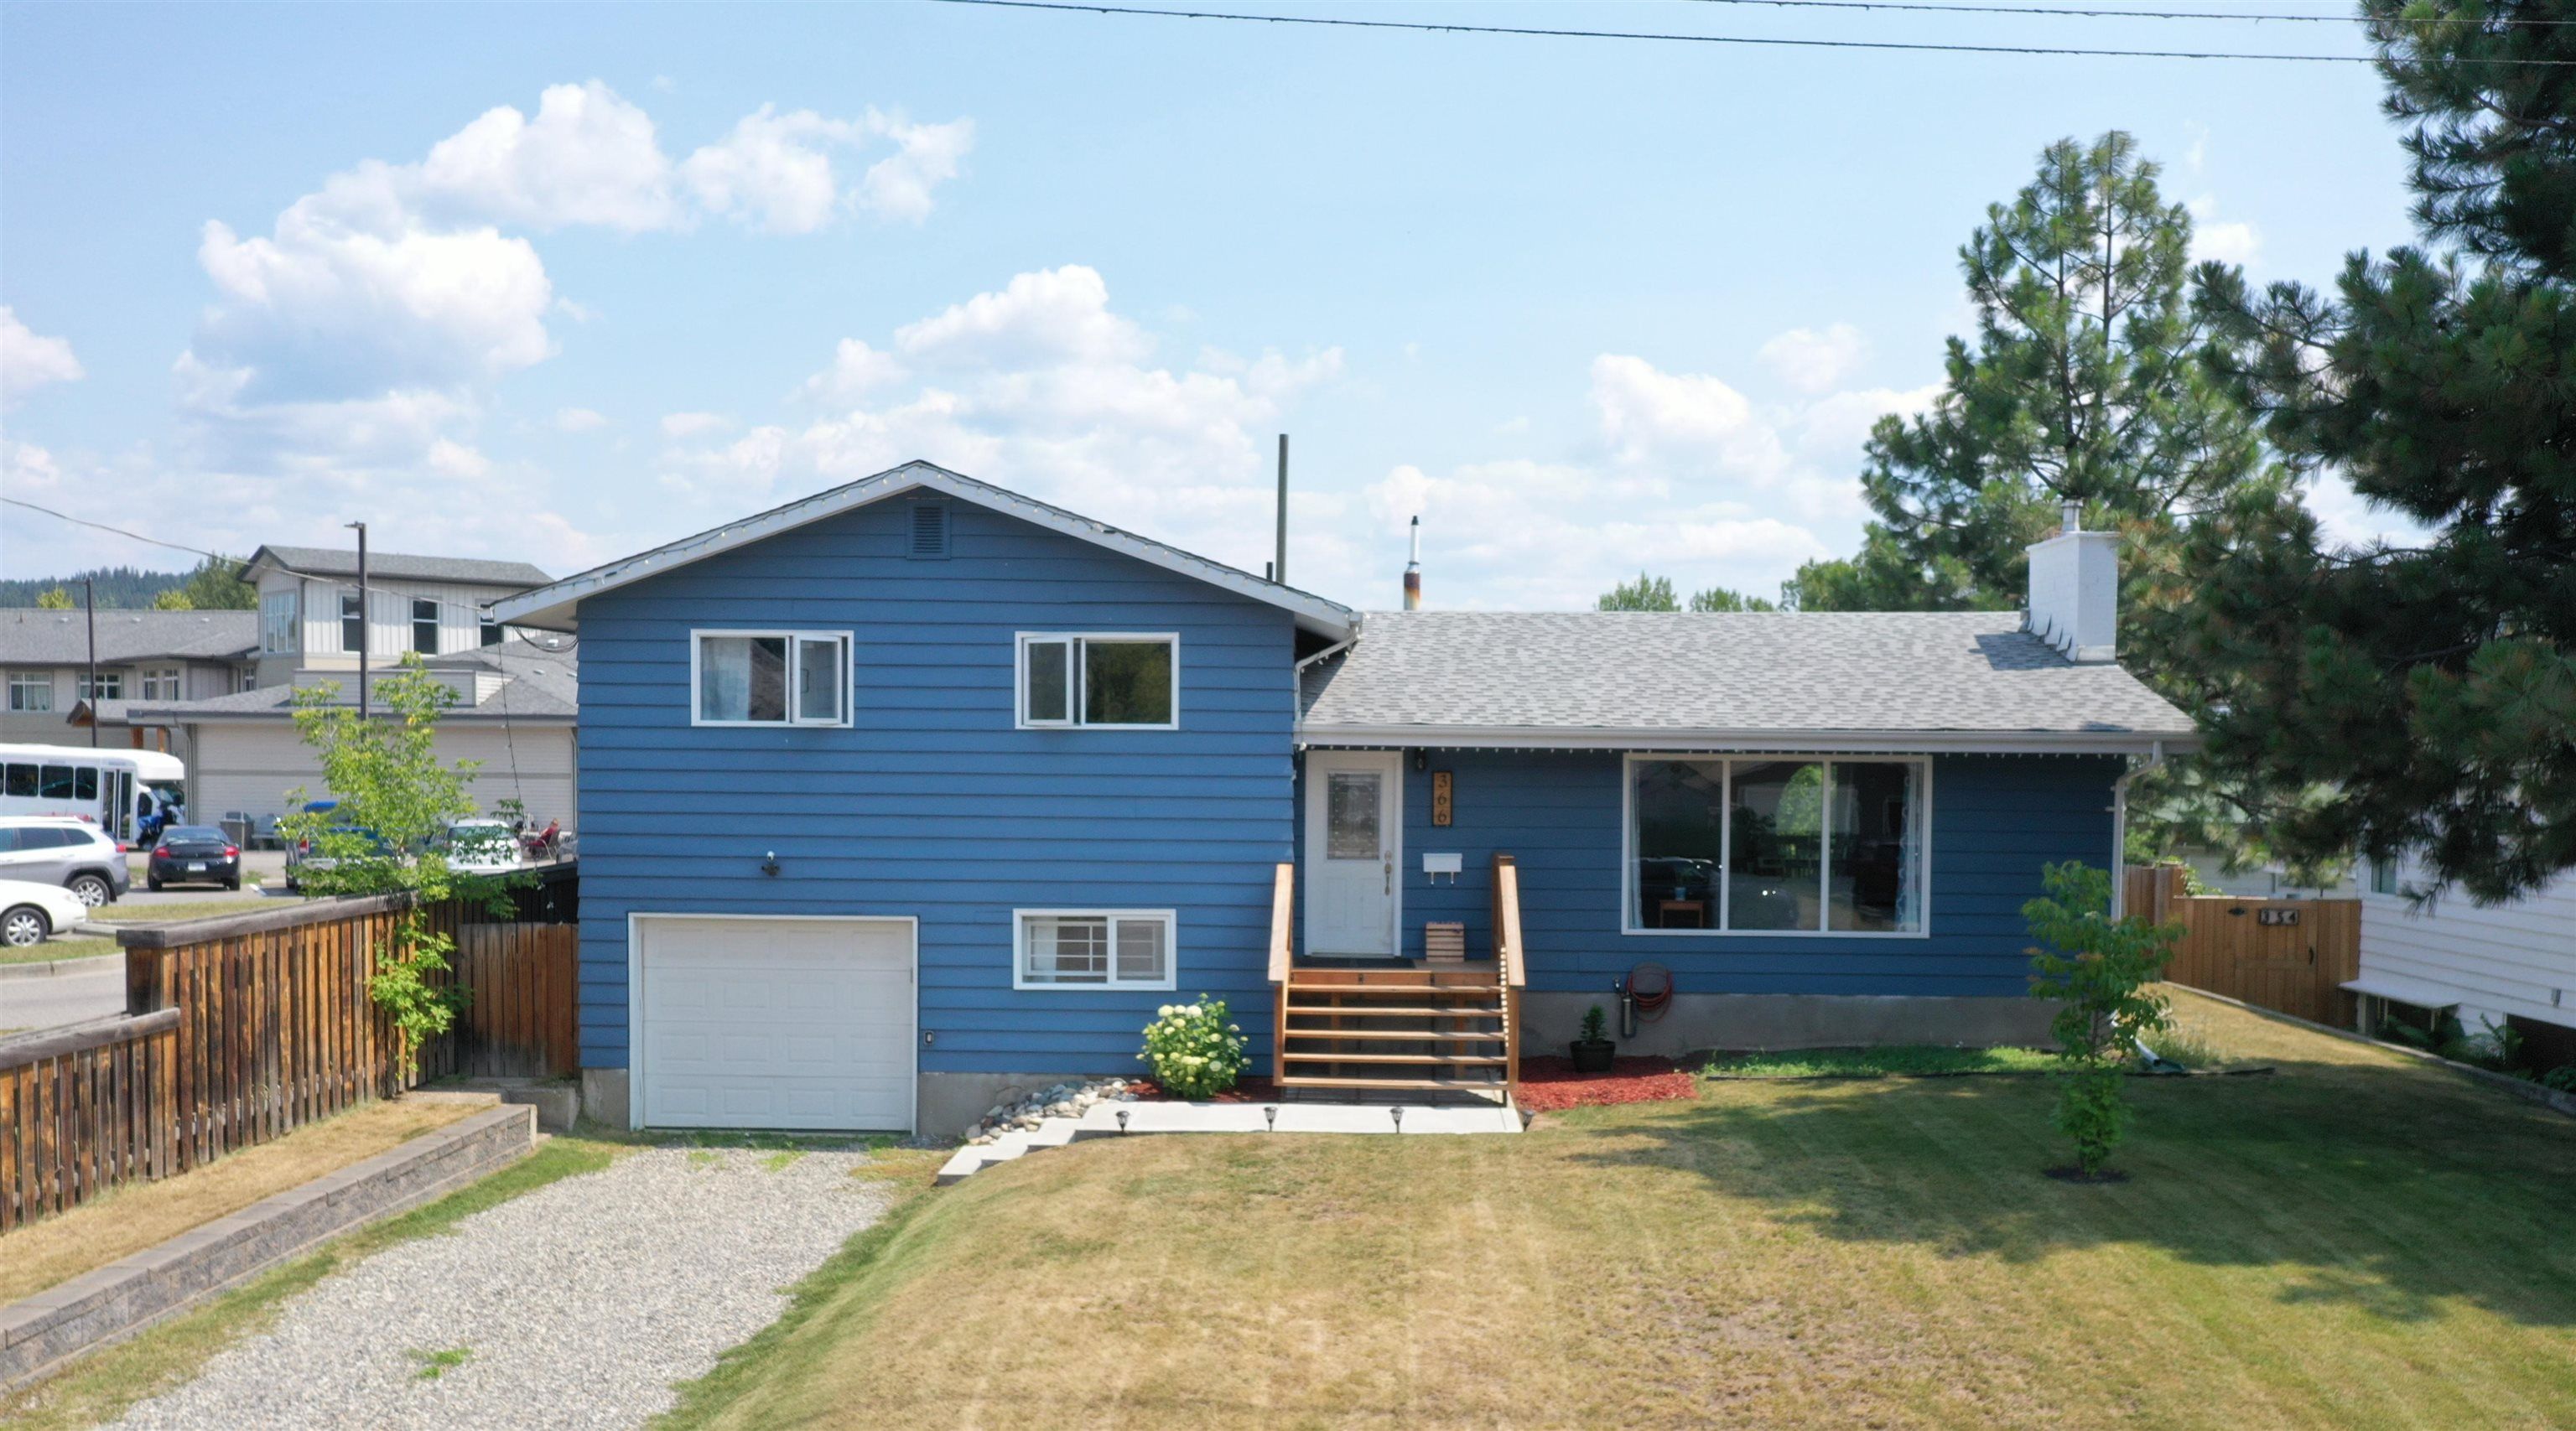 I have sold a property at 366 JONES ST in Quesnel
